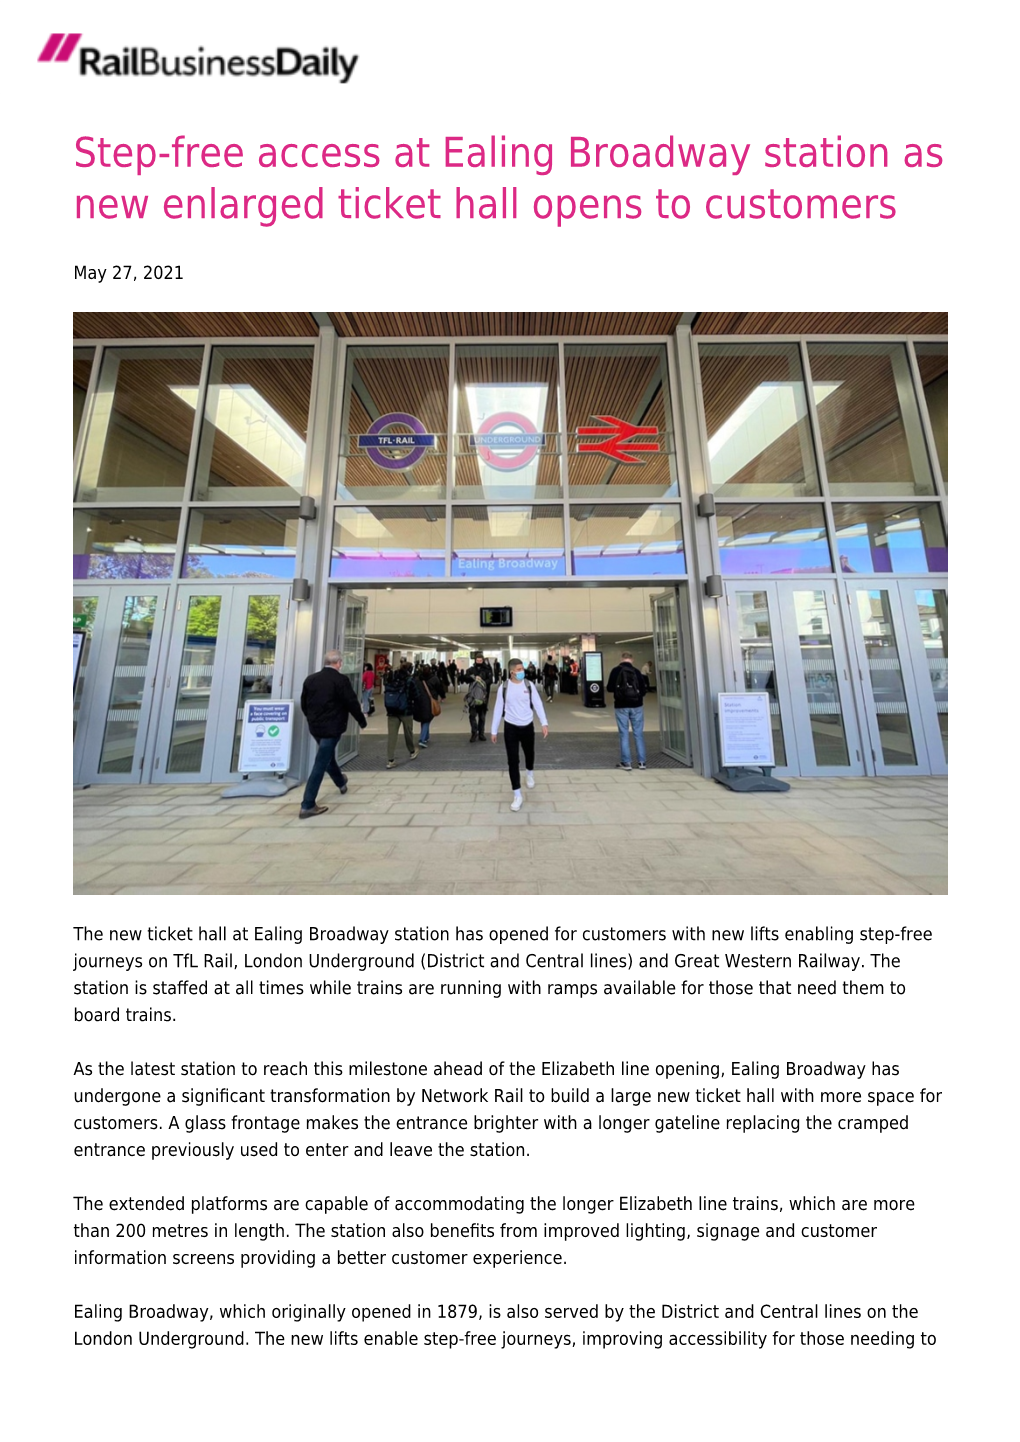 Step-Free Access at Ealing Broadway Station As New Enlarged Ticket Hall Opens to Customers